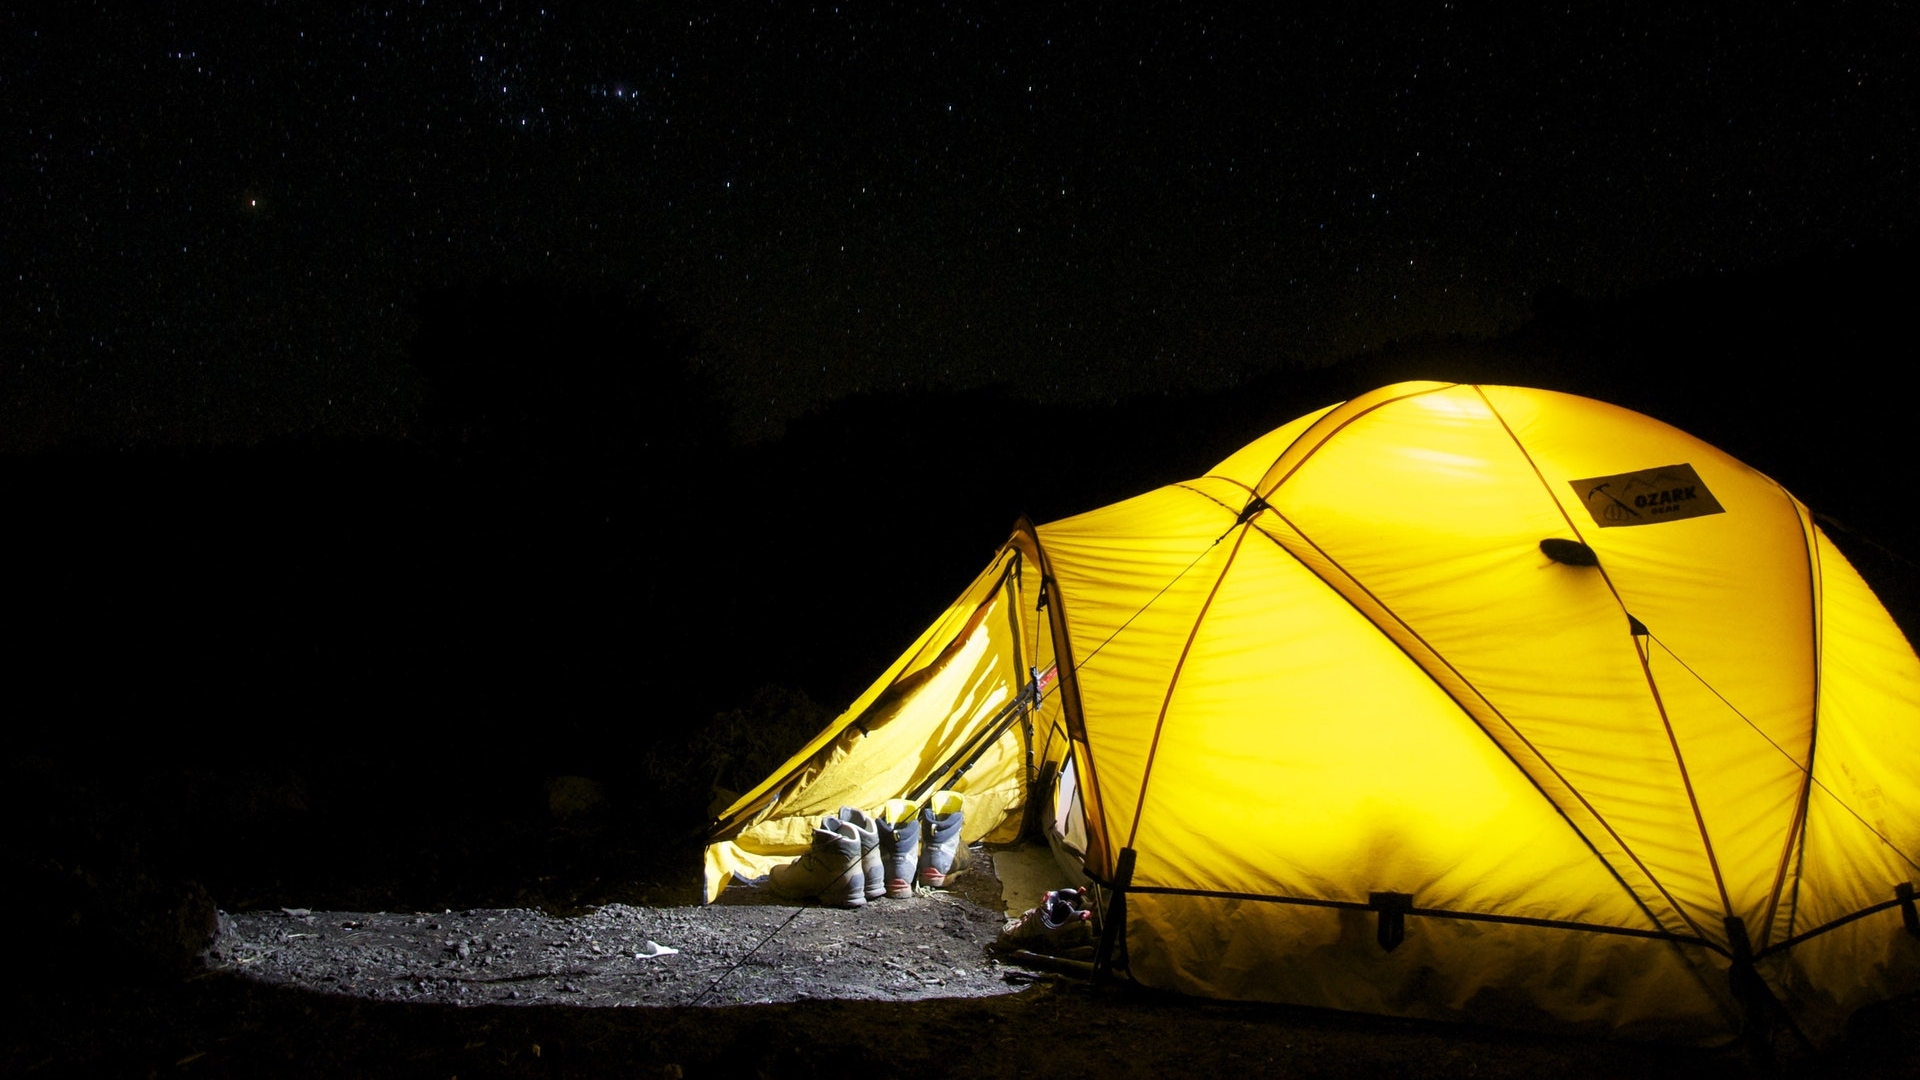 The perfect camping experience without going anywhere far